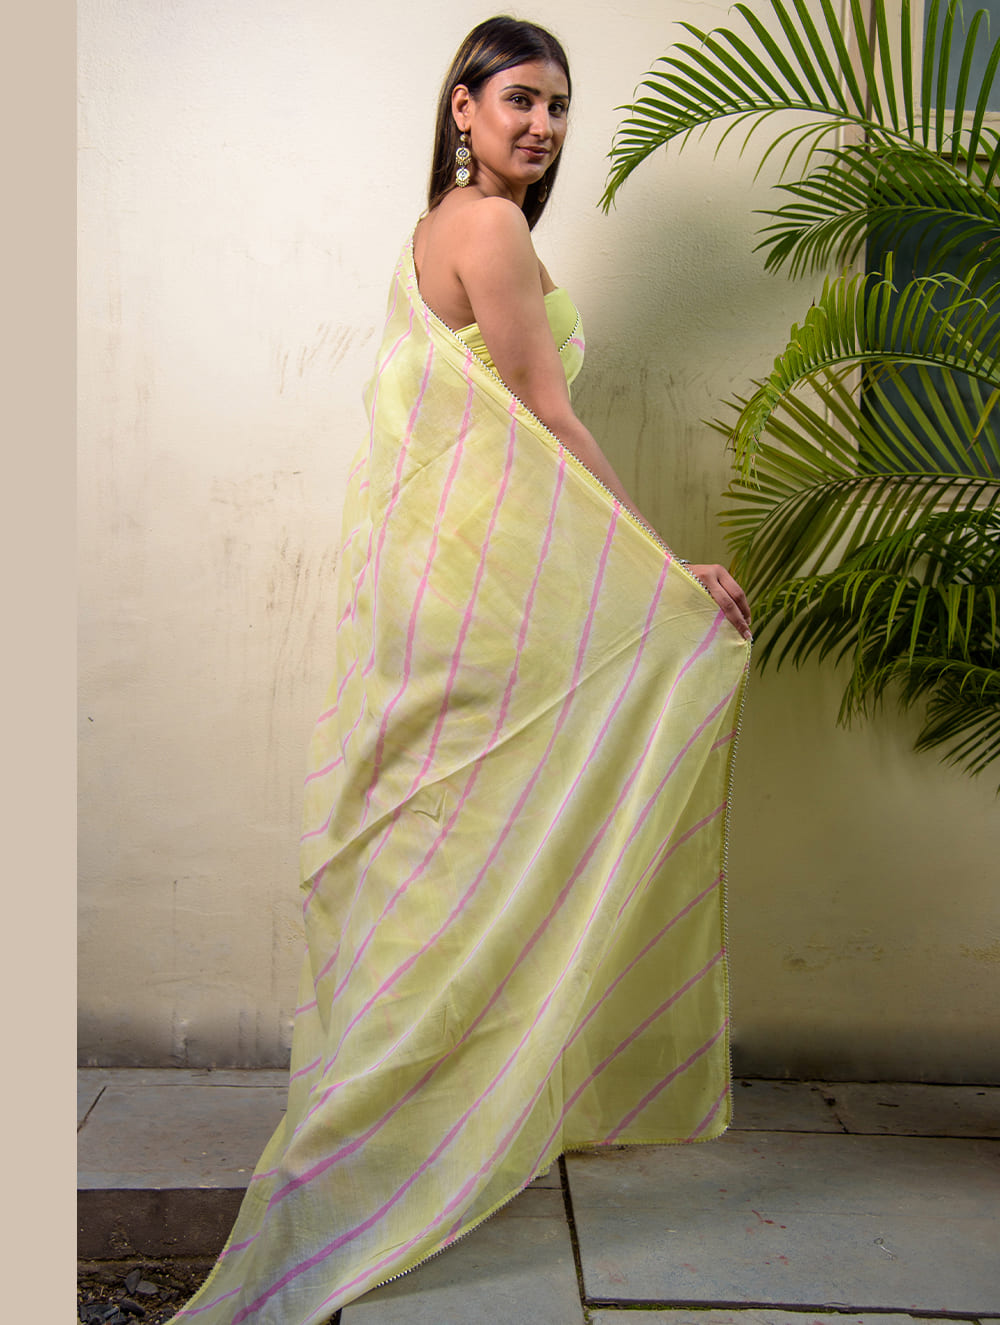 Load image into Gallery viewer, Summer Breeze - Lehariya, Soft Mul &amp; Gota Saree - Lime &amp; Peach (With Blouse Piece)